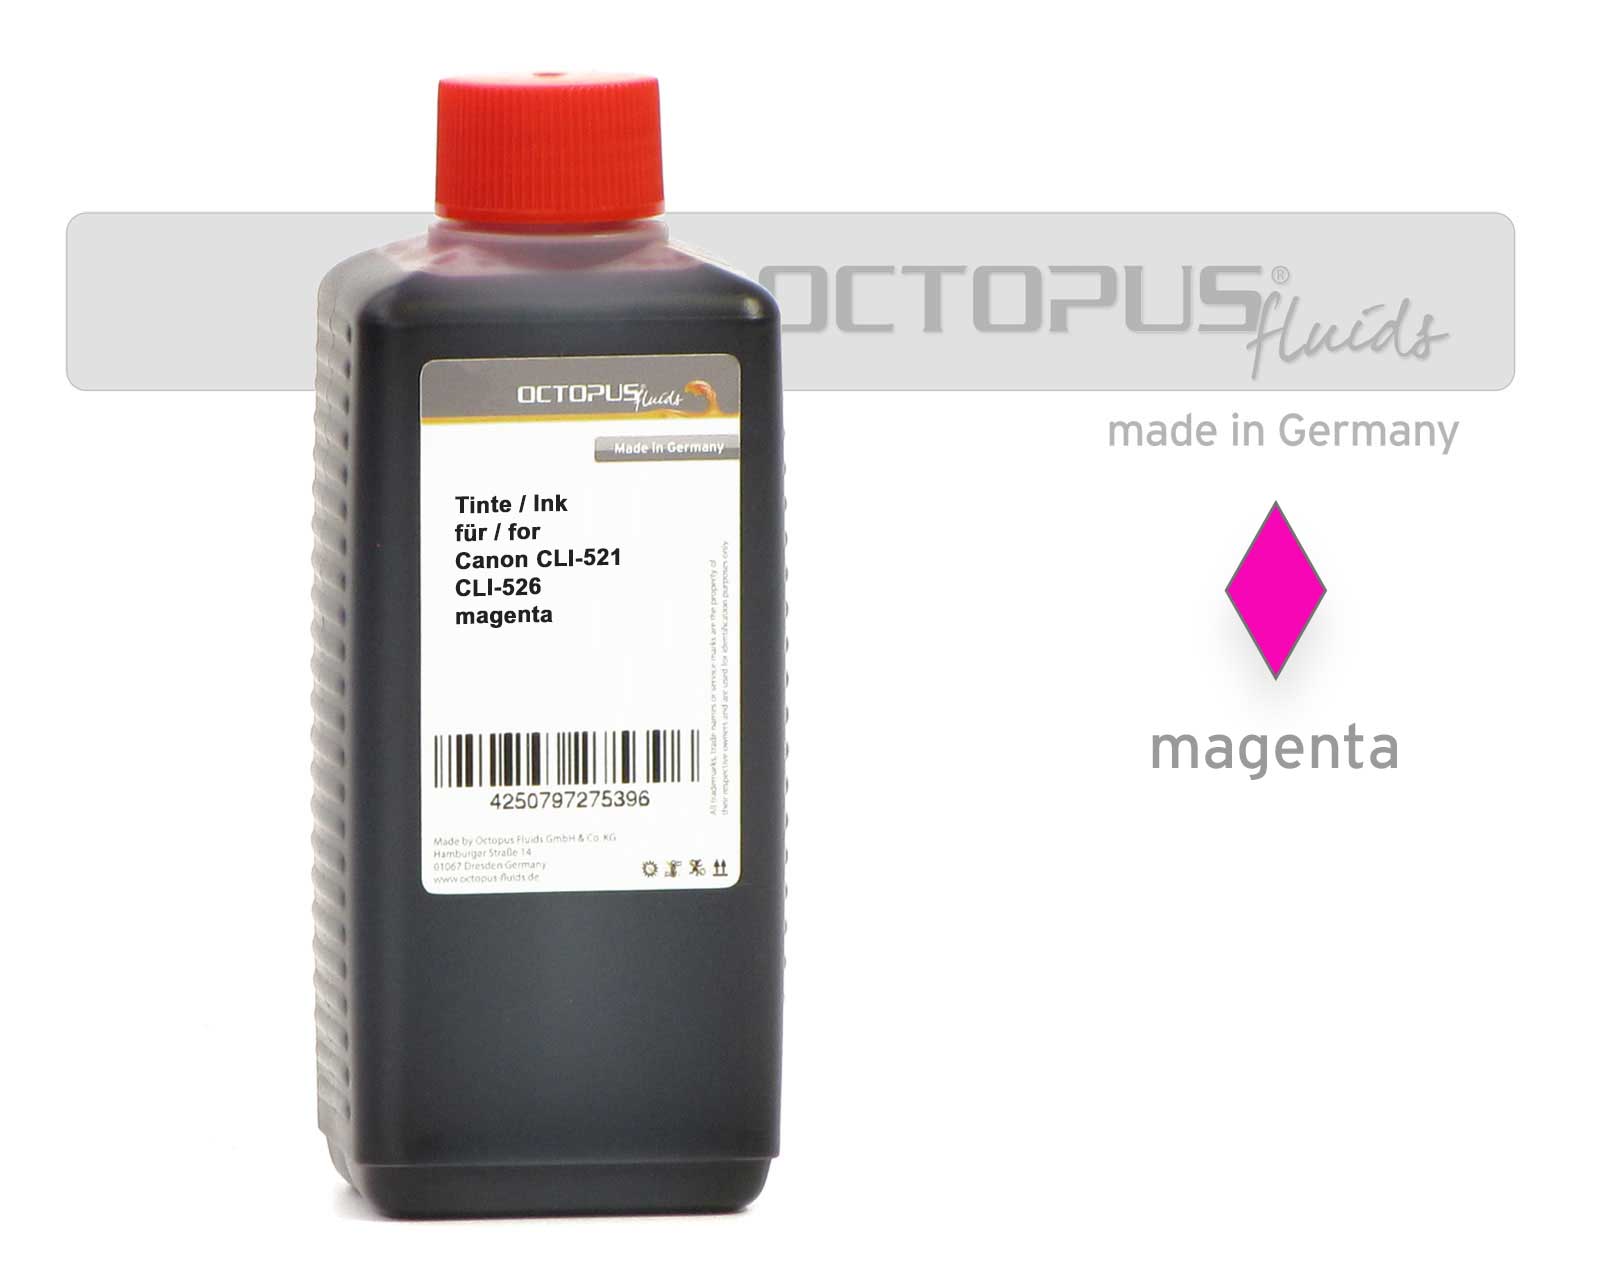 Octopus Ink for Canon CLI-521, CLI-526 magenta